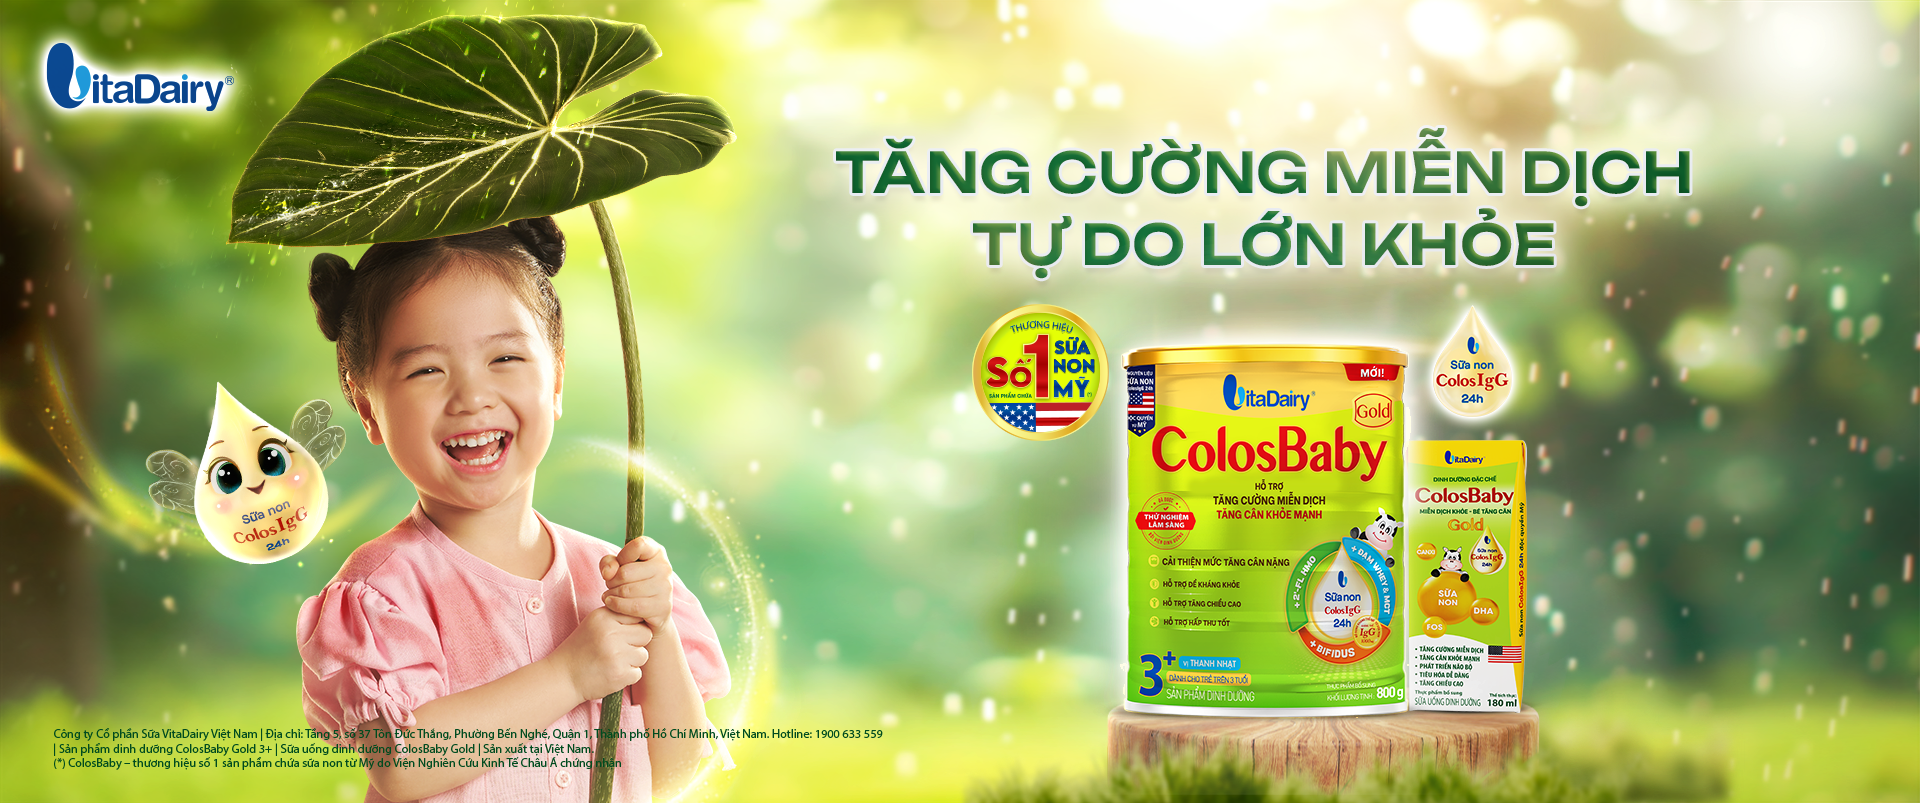 ColosBaby Gold Mới